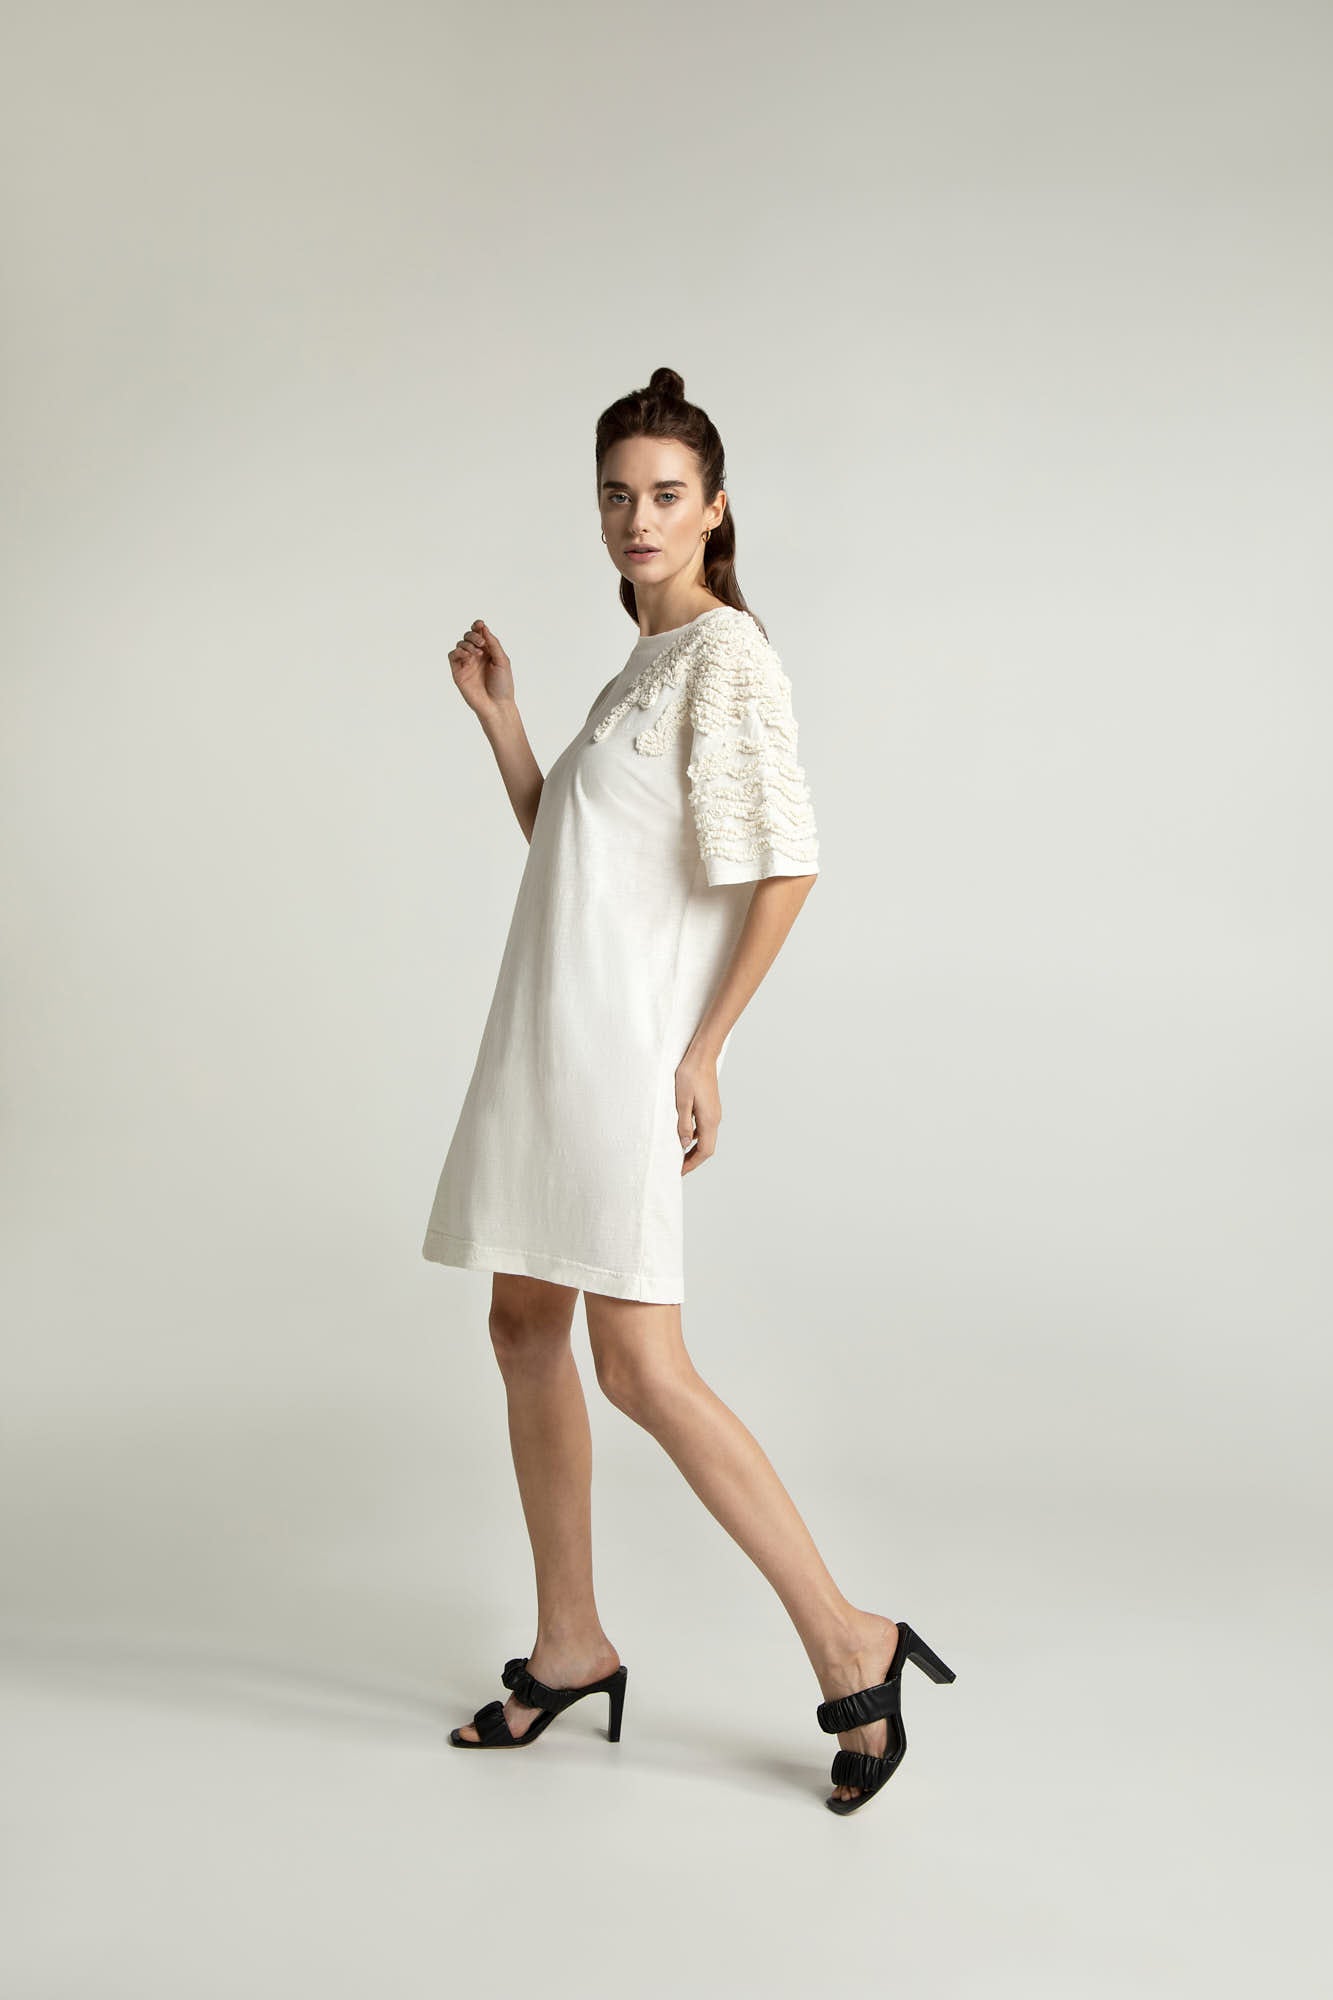 Dress ELOUISE in offwhite by LOVJOI made of organic cotton 